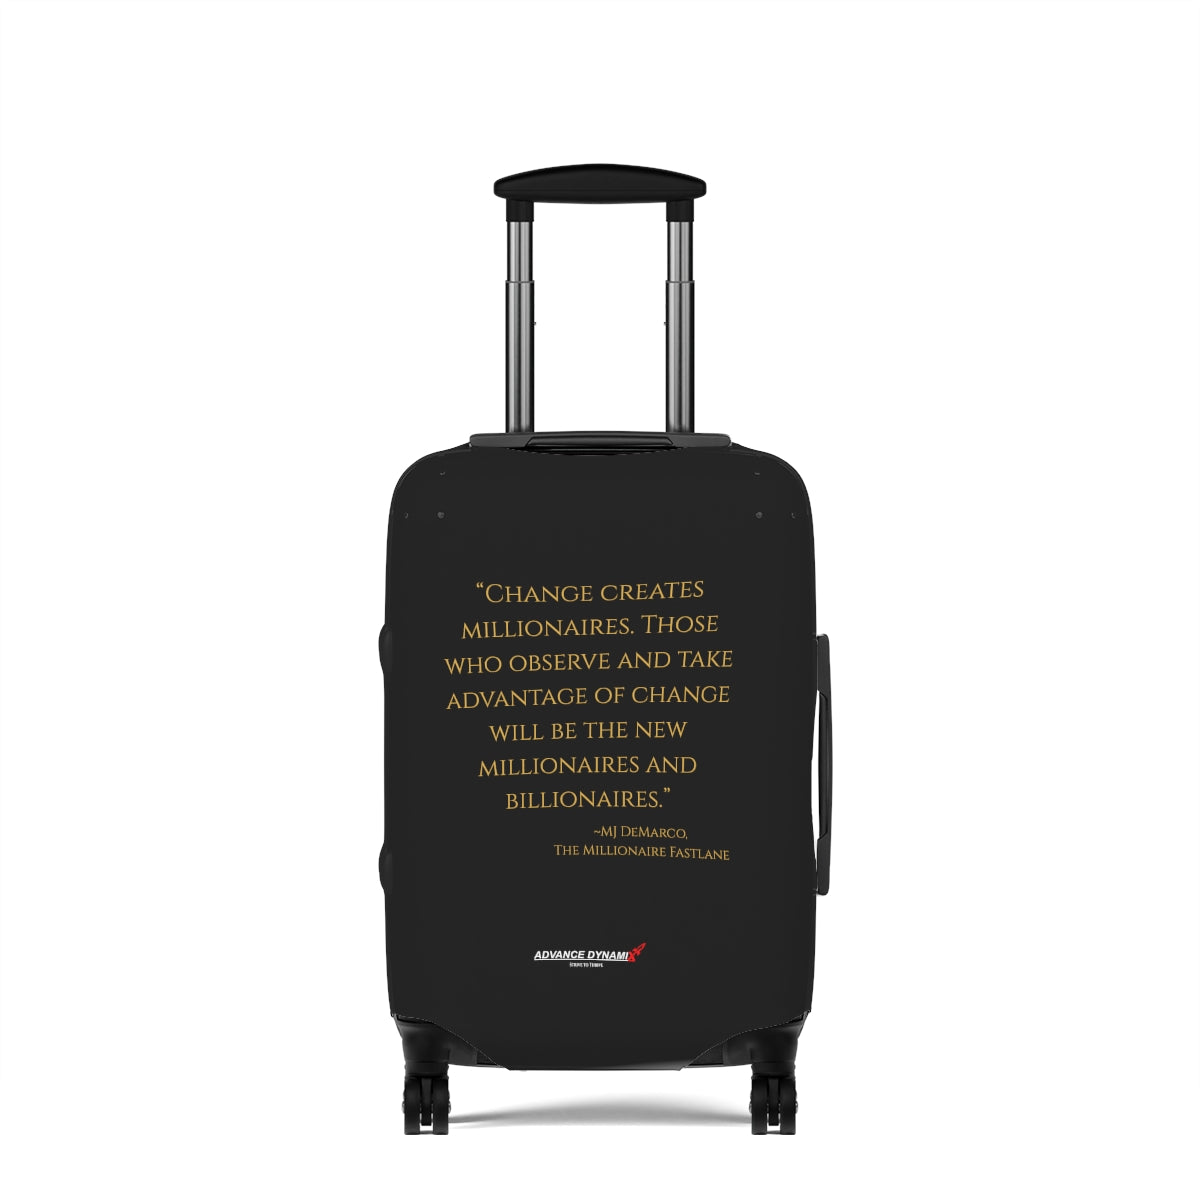 "Change creates millionaires. Those who..." ~MJ DeMarco, The Millionaire Fastlane - Luggage Covers Infused with Advance Dynamix Add-A-Tude - Tell the world!